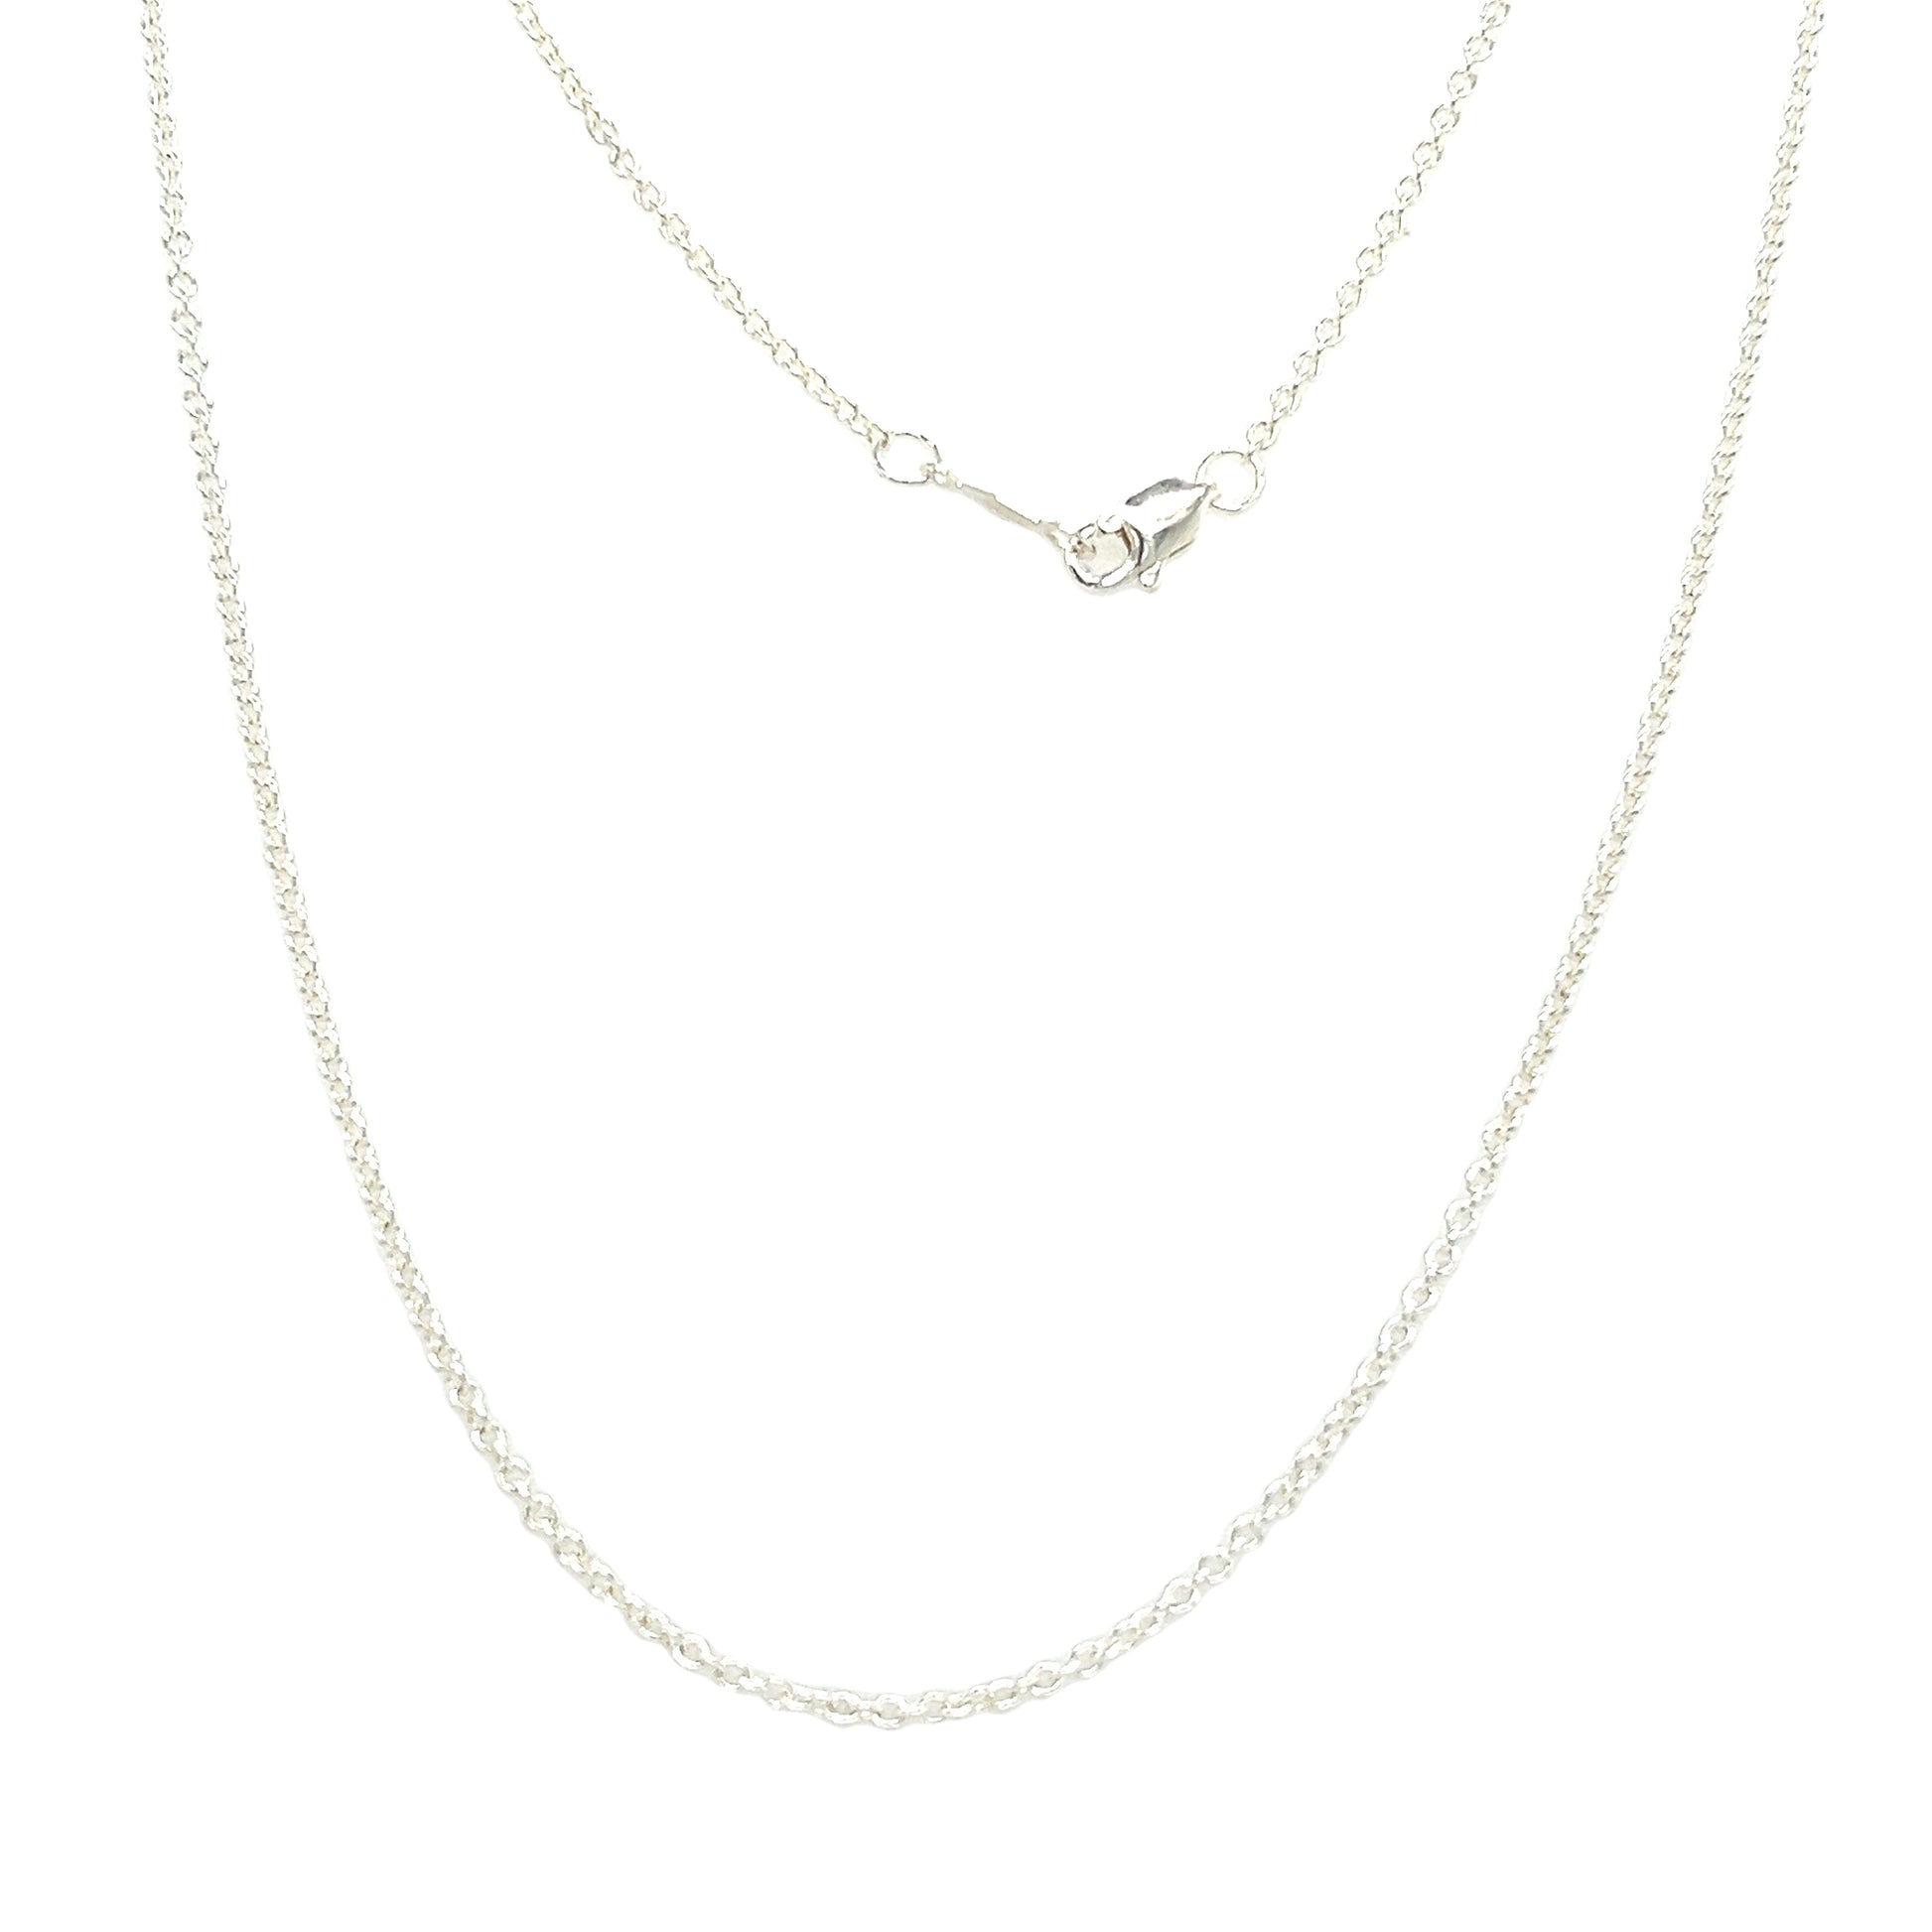 Cable Chain 1.5mm with Twenty Inches of Length in Sterling Silver Full Chain Front View